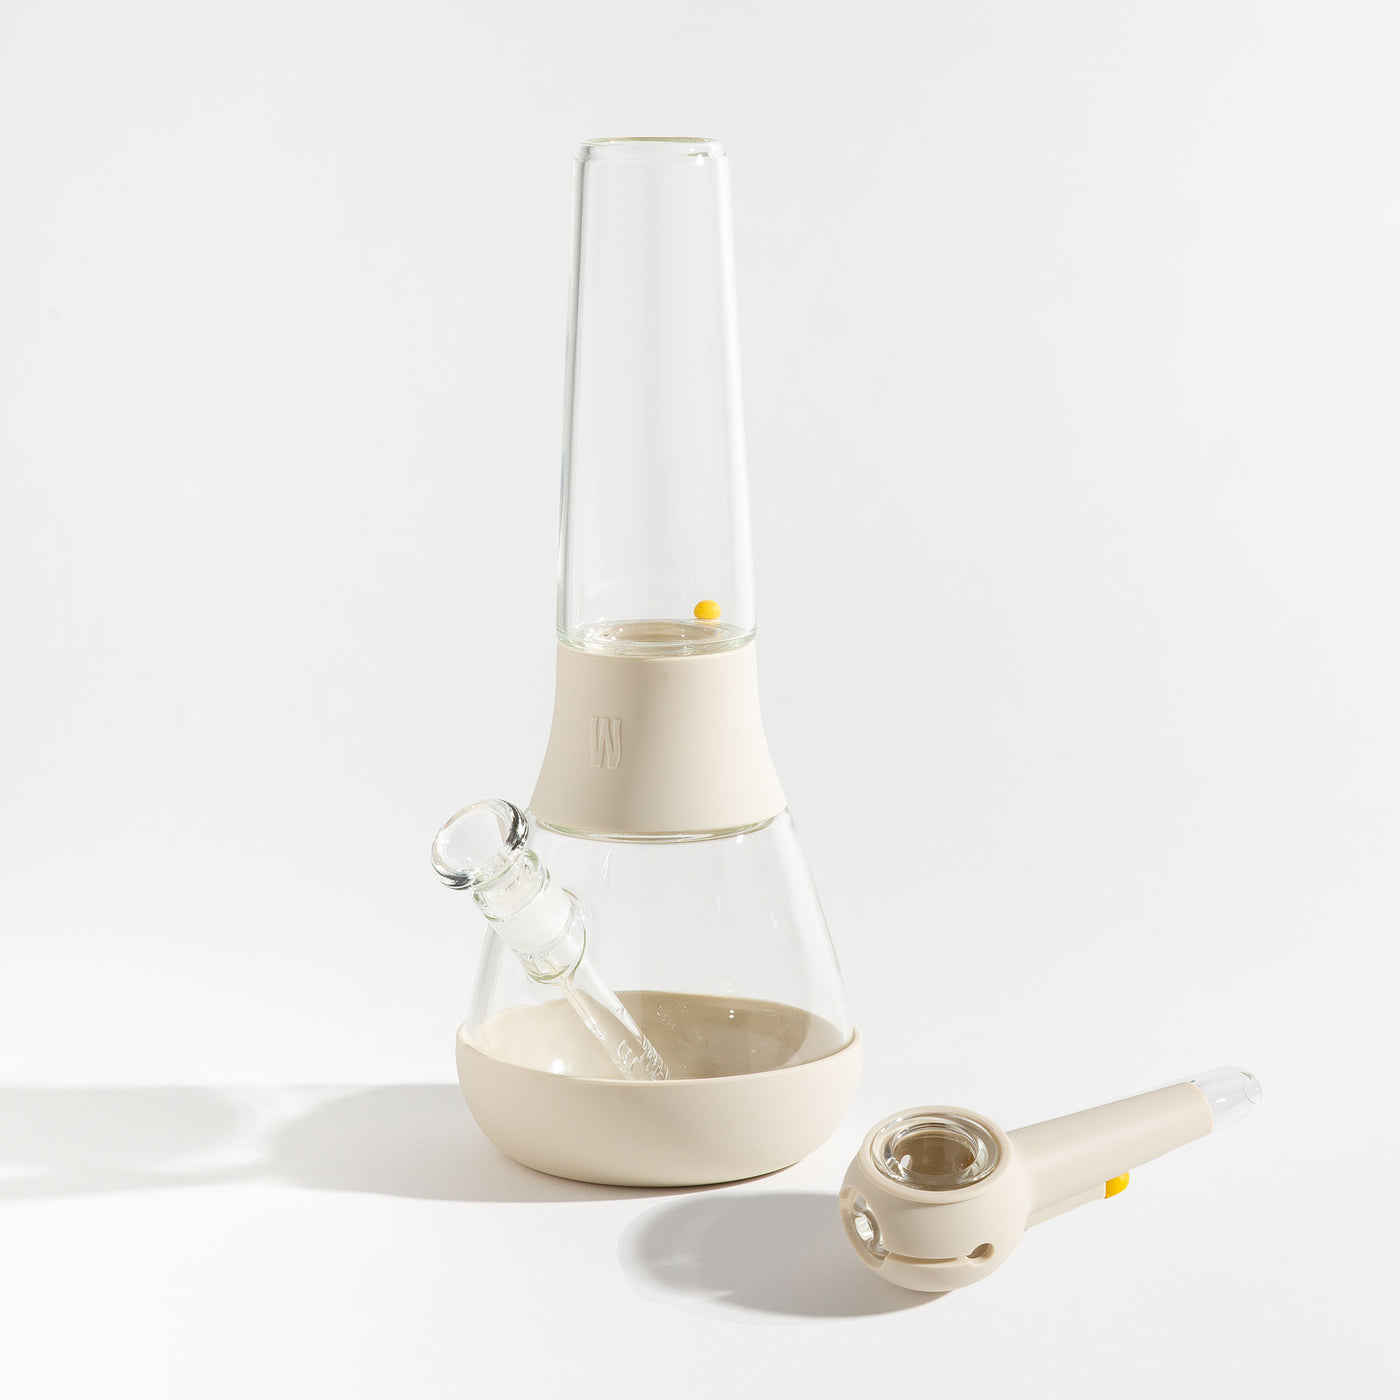 A bundle set of the Weeday modular glass bong and spoon pipe in cream white silicone covers on a white background.